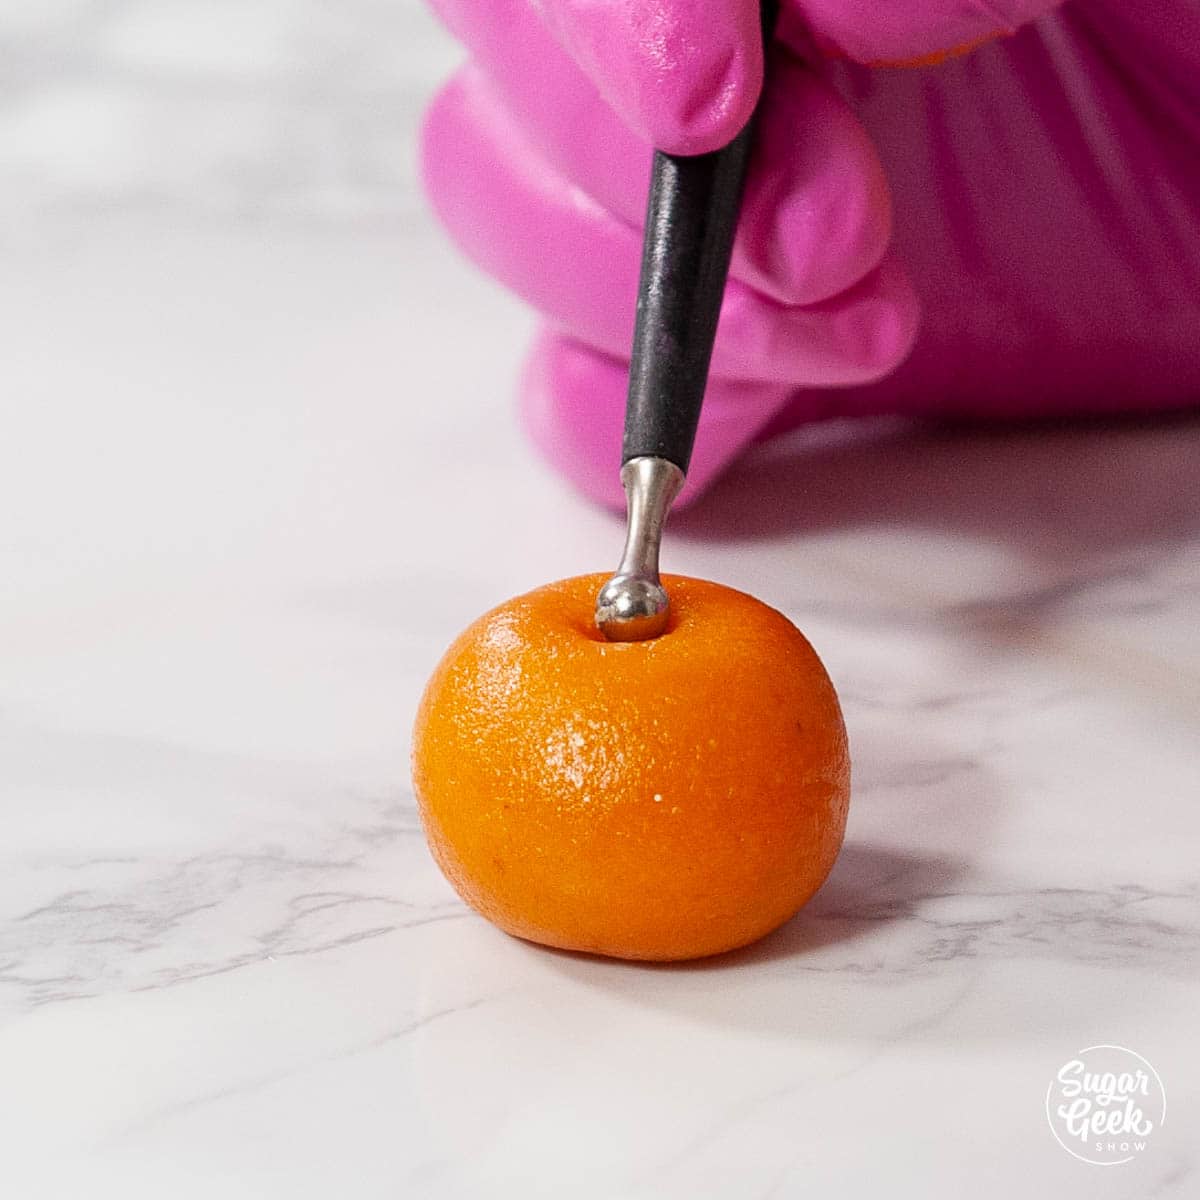 orange marzipan candy ball with pink gloved hand holding modeling tool